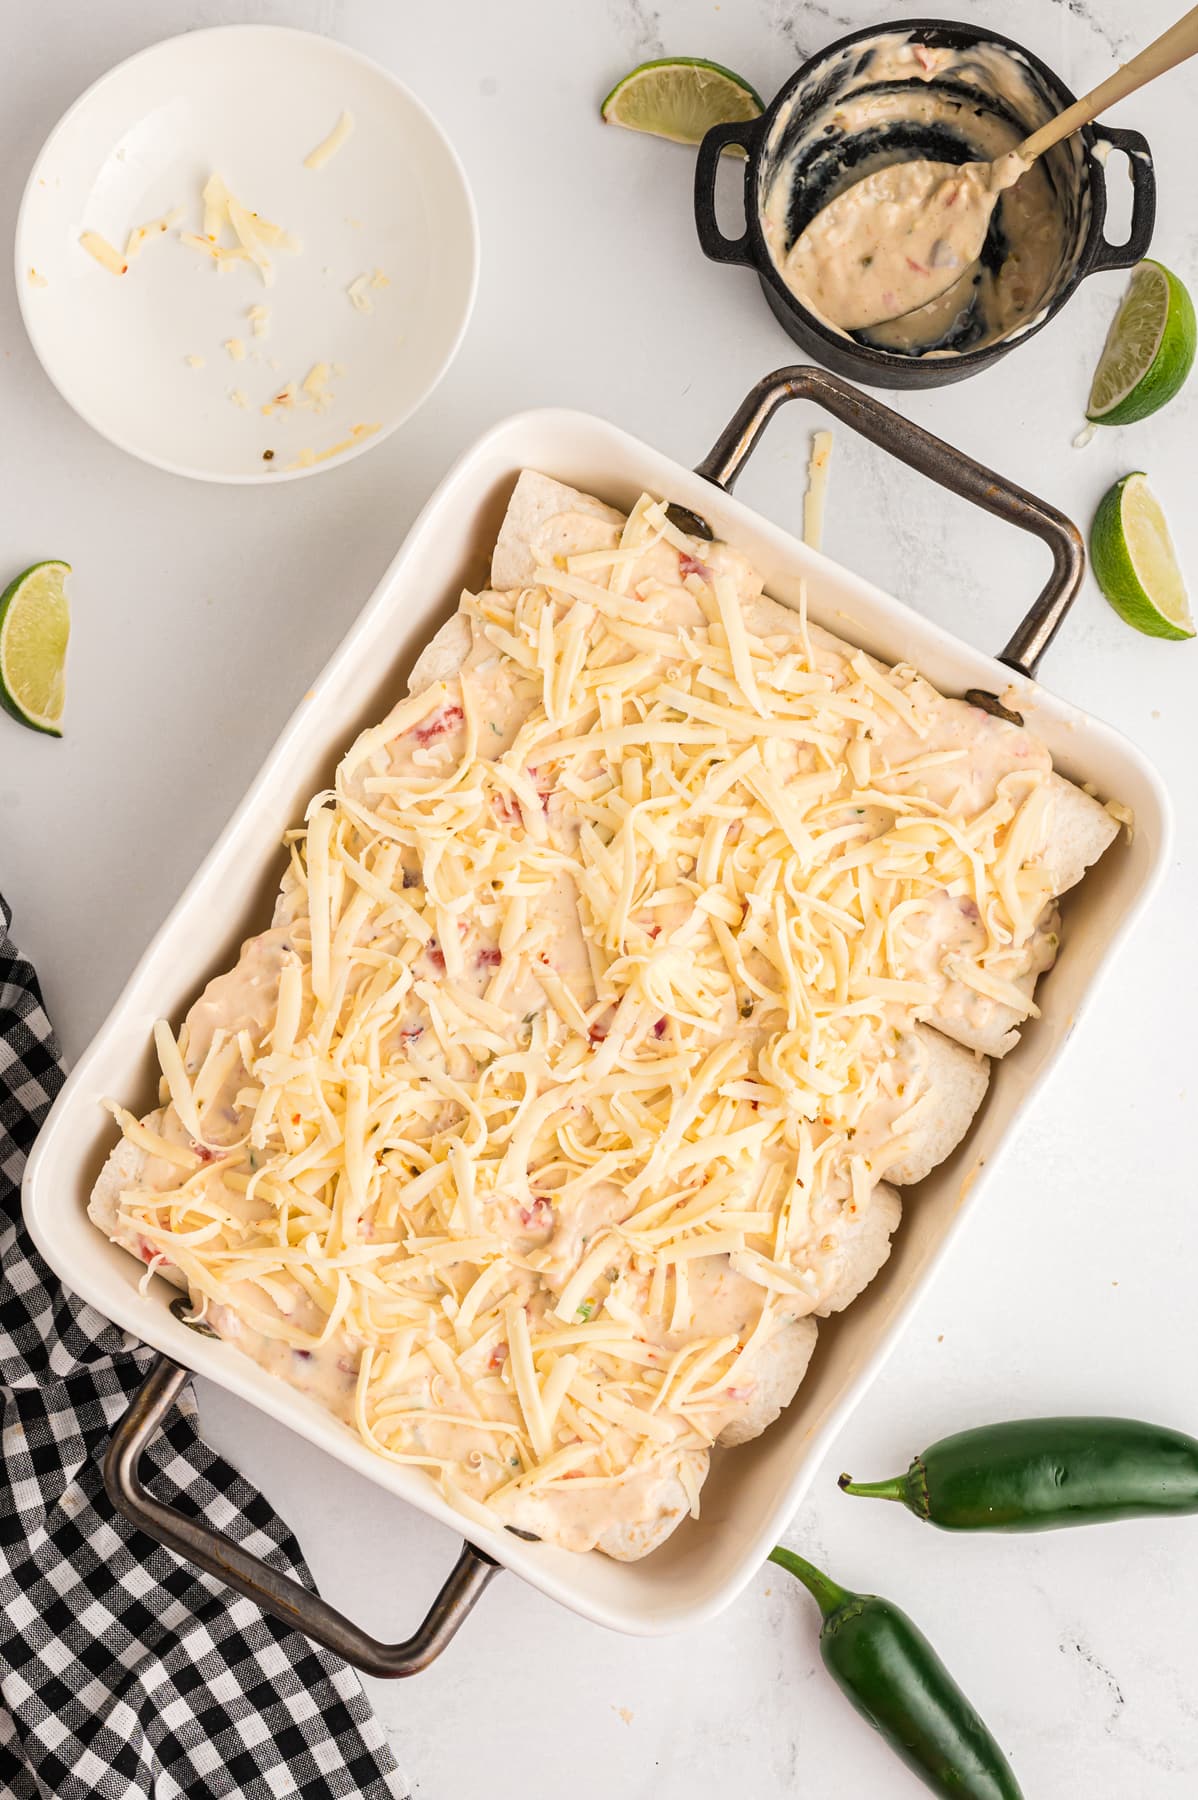 Enchiladas topped with queso blanco and shredded cheese in a baking dish